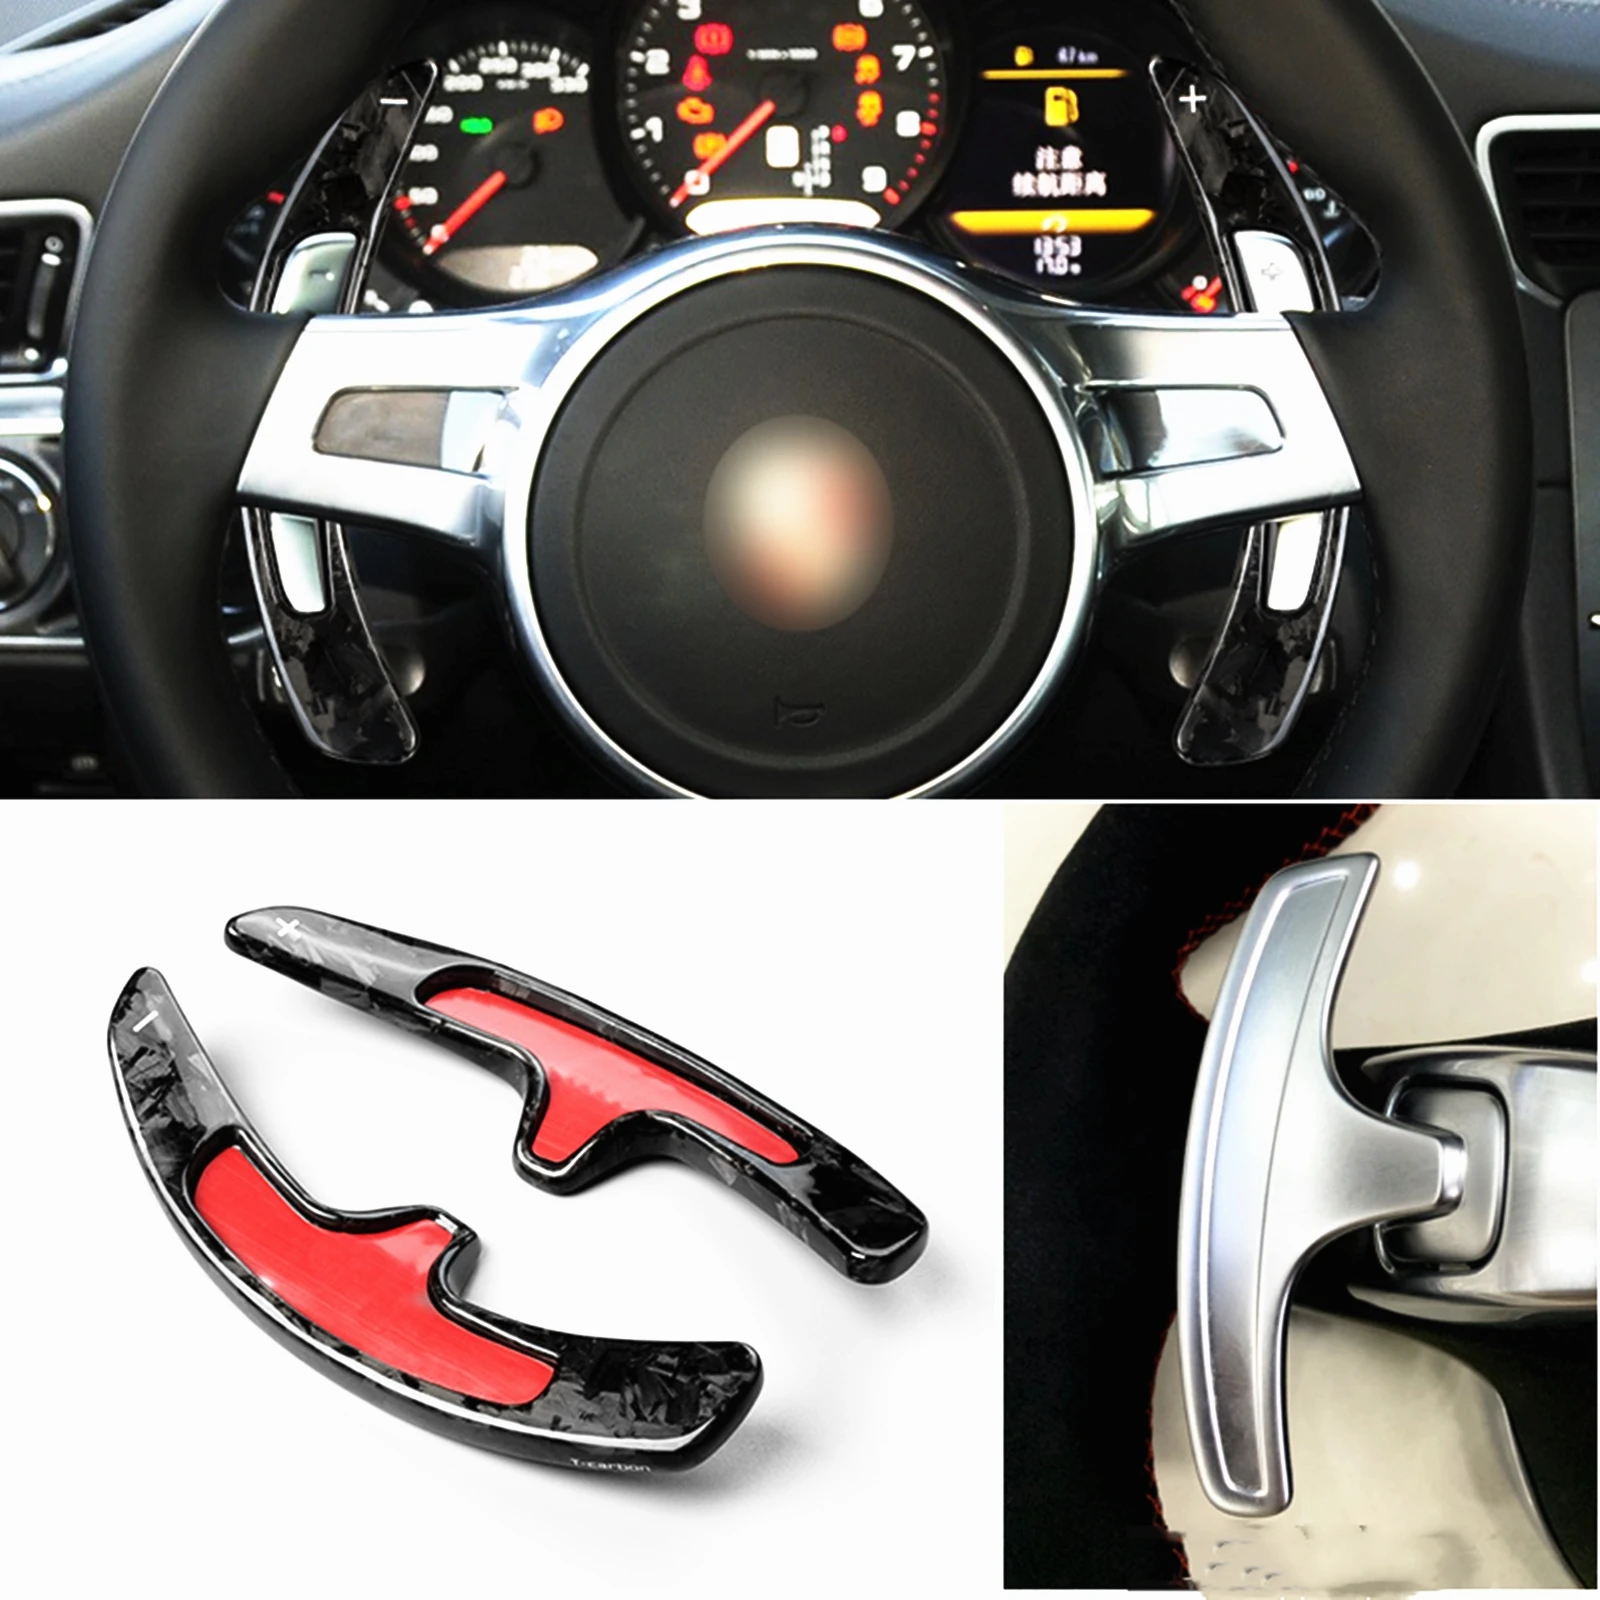 

Forged Carbon Fiber Gear Steering Wheel Shifter Shift Paddle Extension For Porsche 991 2013-2016 Cayman 981 Carrera Boxter BPO